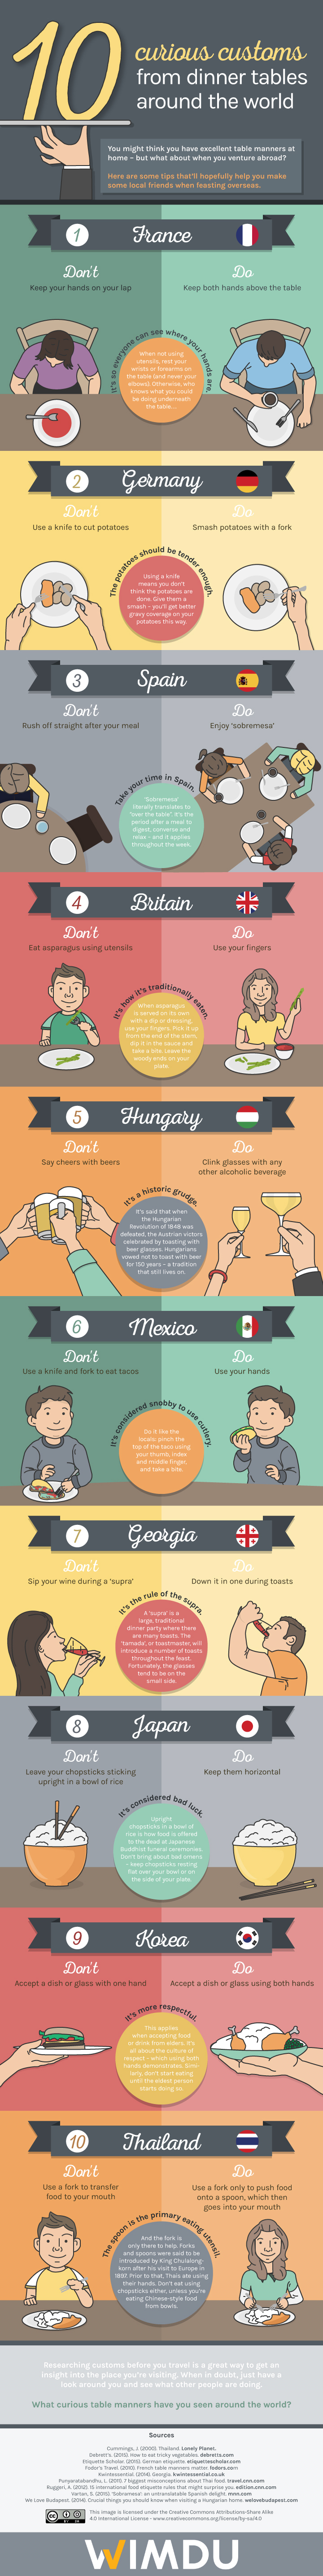 10 customs - table manners around the world - #infographic